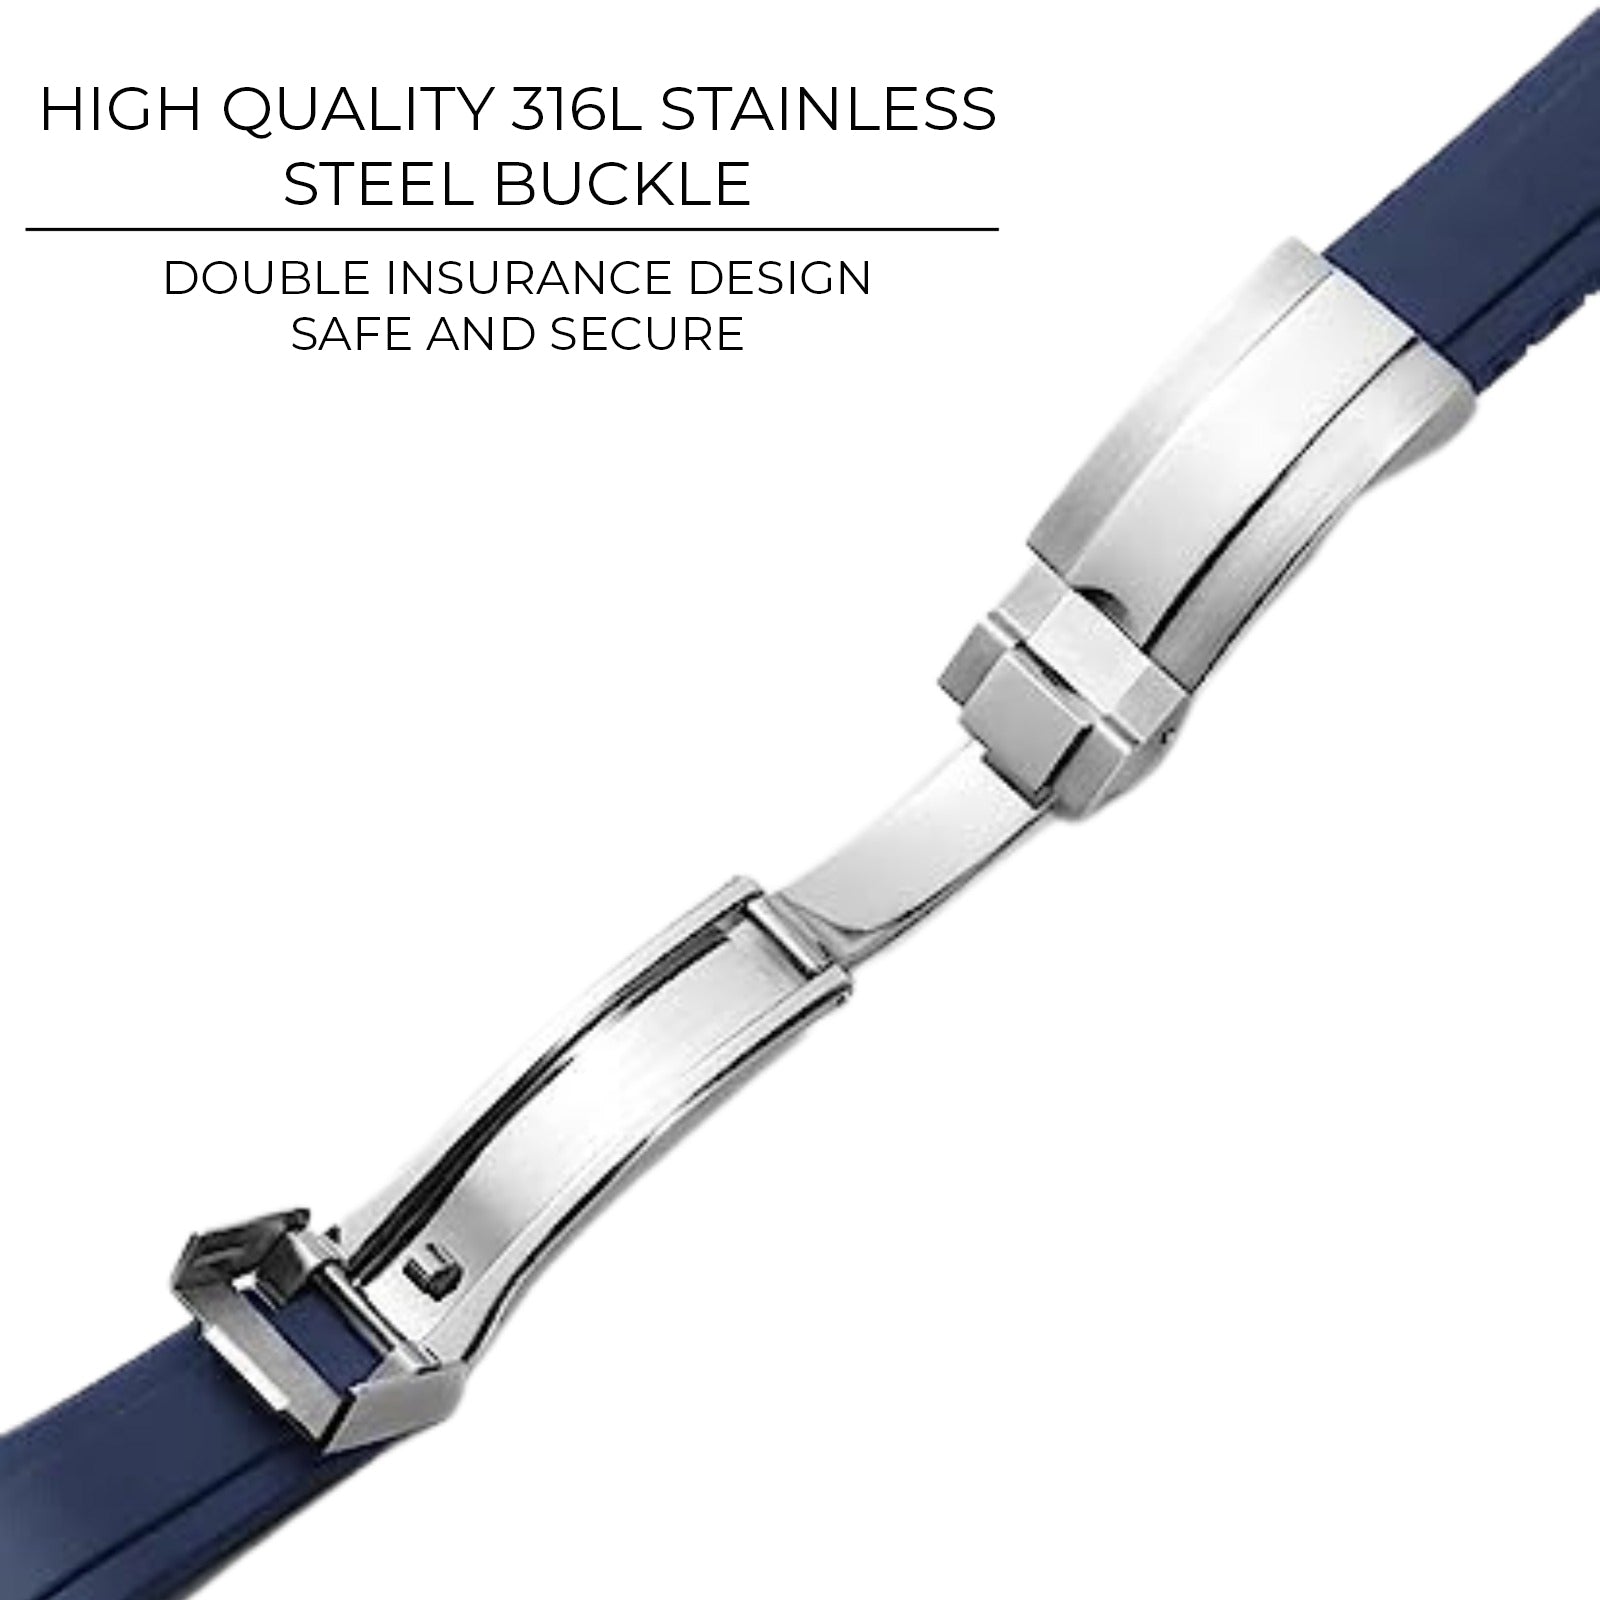 High End Curved FKM Rubber Watch Band with Oyster Style Deployment Clasp: 20 mm - Blue with Gold Dual tone